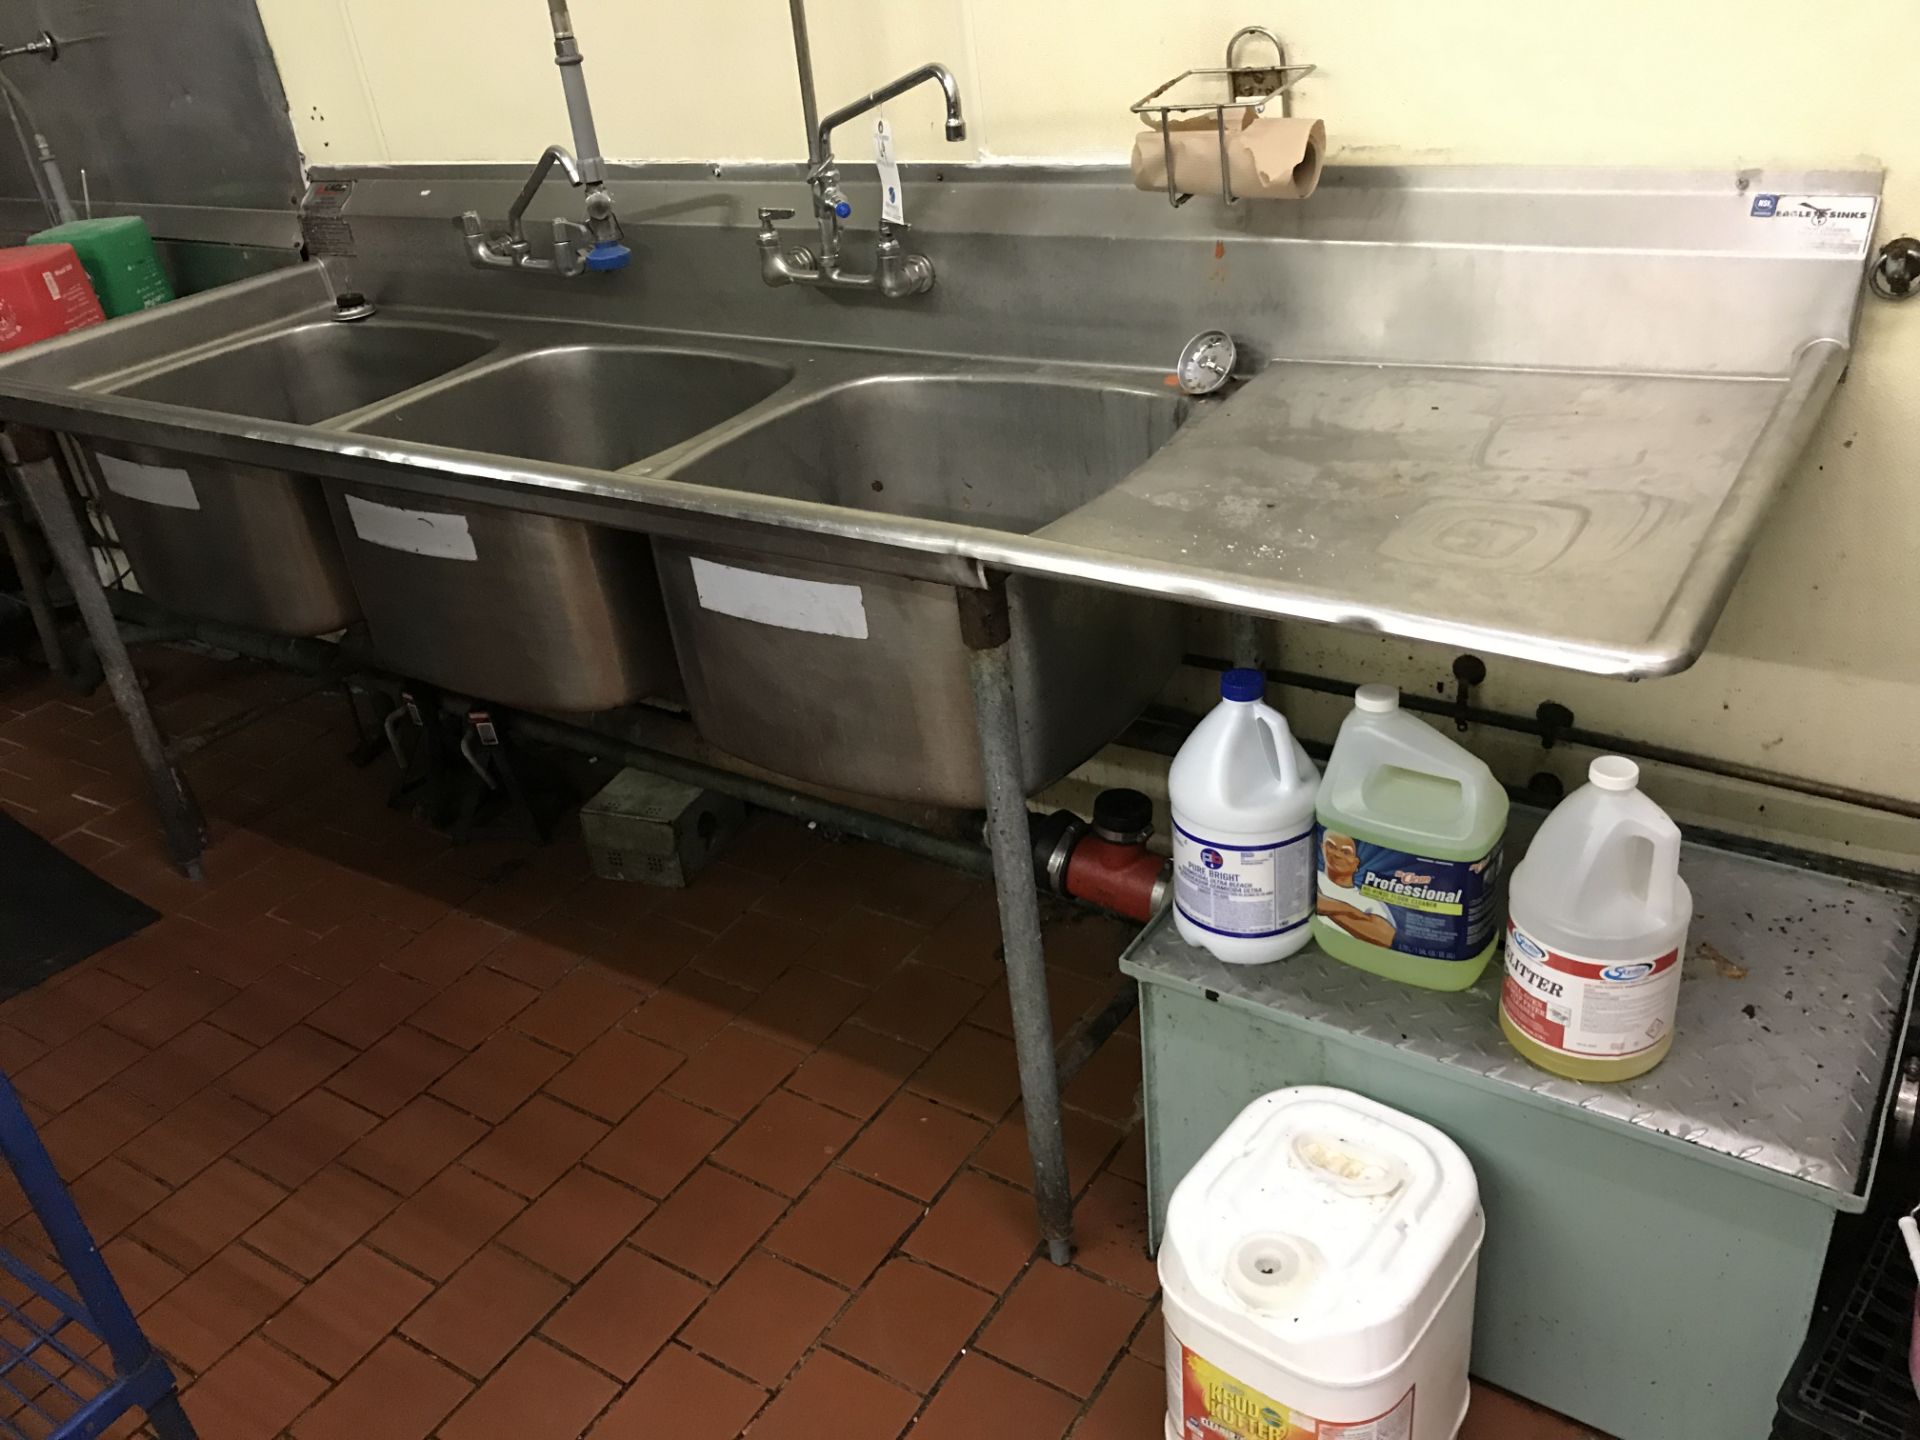 Eagle 3 Compartment SS Sink w/T & S Spray & Drainboard, Overall Sink: 96"W x 29"D - Image 2 of 2